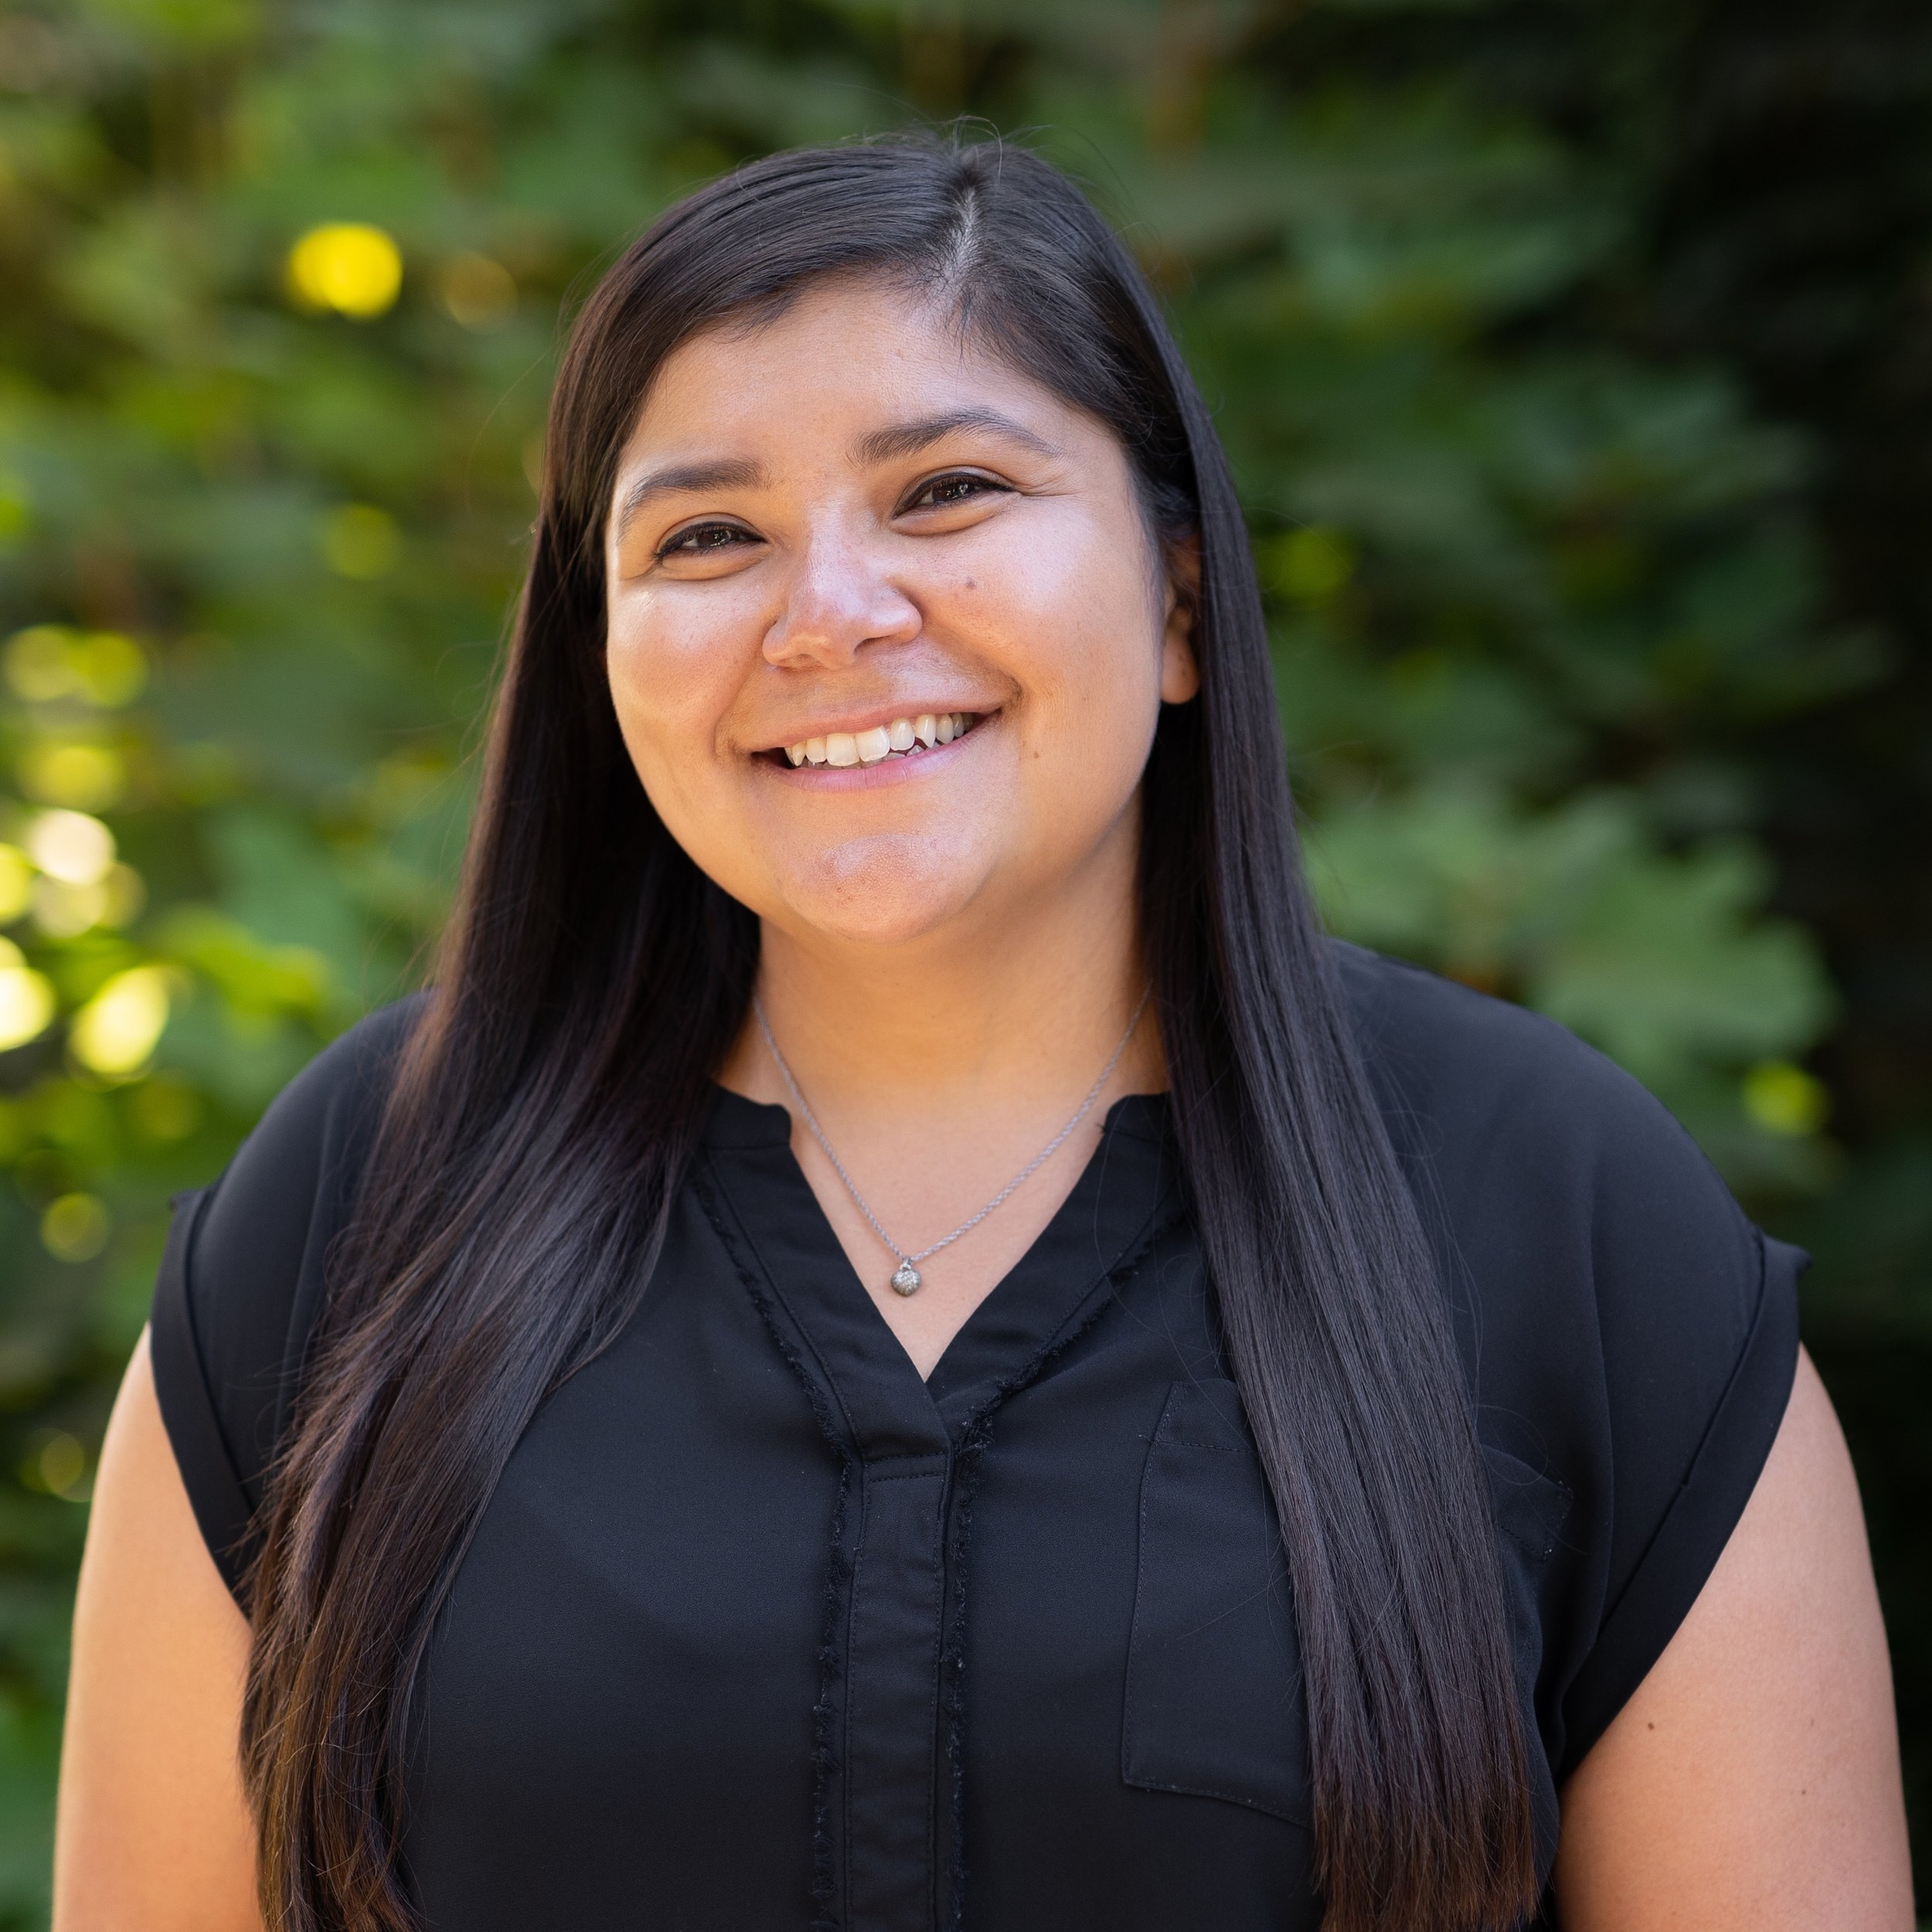 We are so excited to have our guest preacher Alyssa Perez from @la__voice at church tomorrow! She will be speaking on 1 Corinthians 12: 12-26. 

Here is a little bit about her:

Alyssa joined LA Voice staff in July 2022 as the Civic Engagement Organi